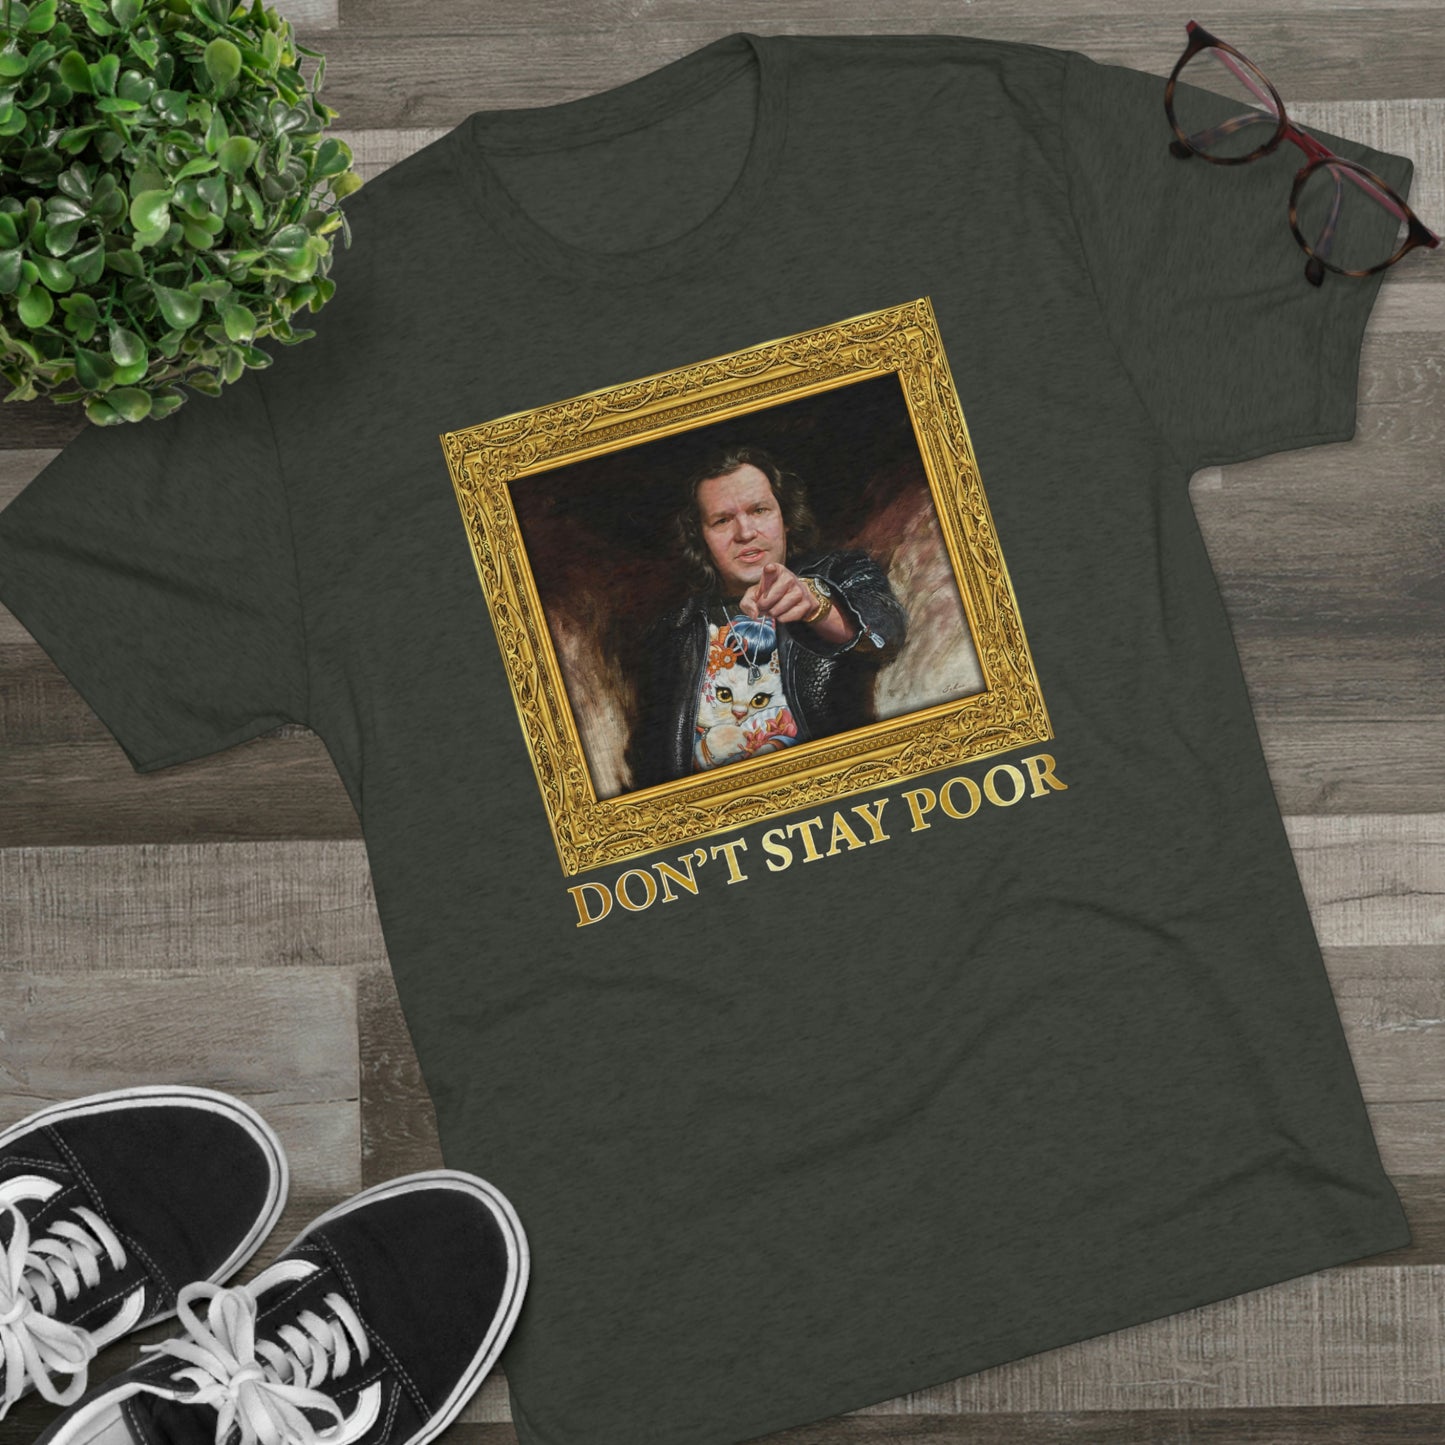 The Painting - Don't Stay Poor - Unisex Tri-Blend Crew T-Shirt